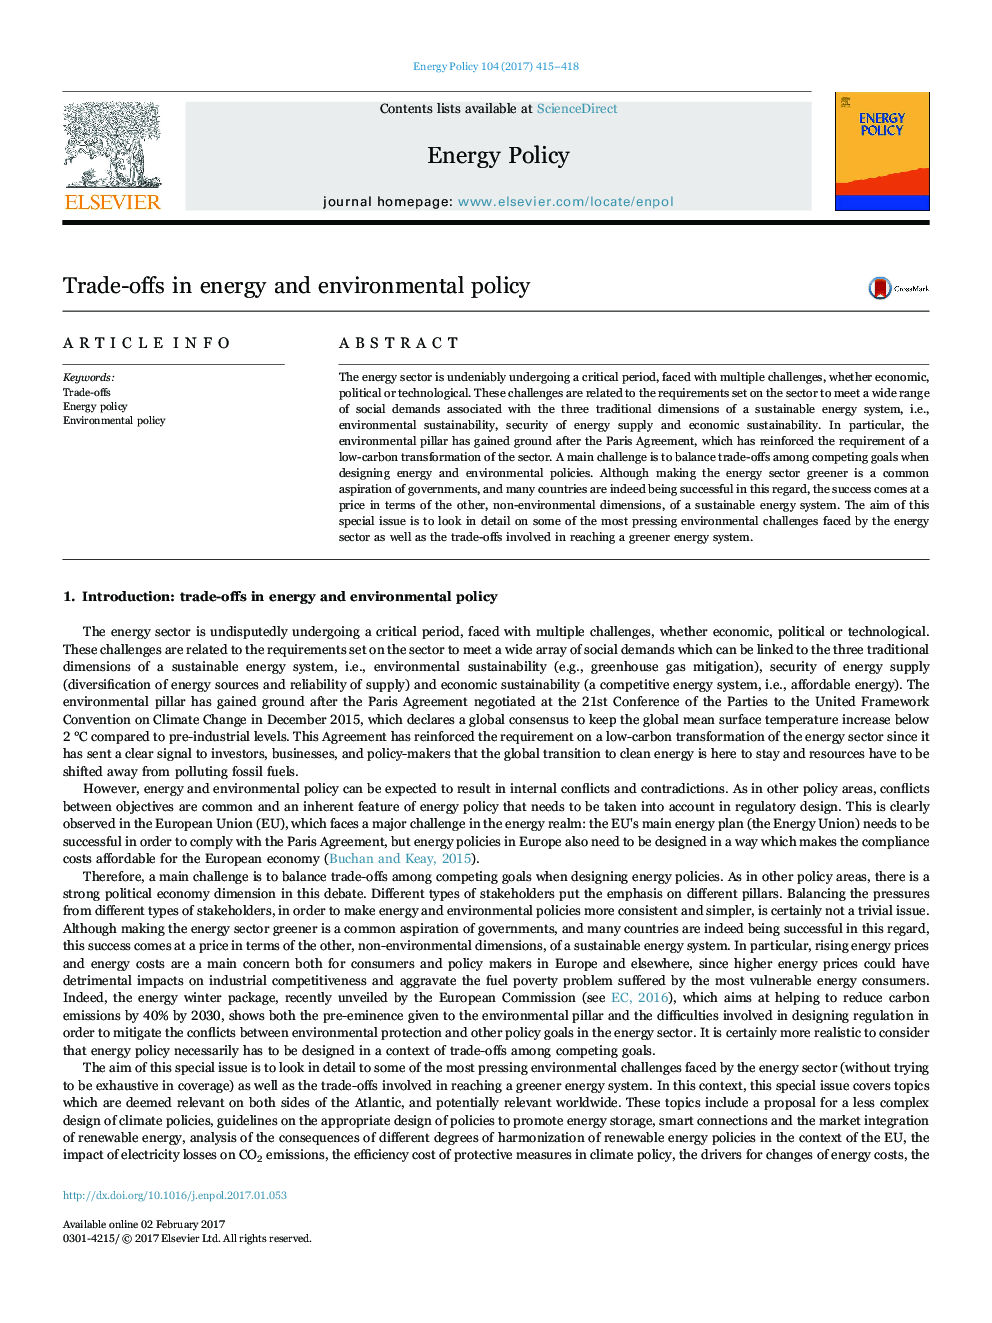 Trade-offs in energy and environmental policy